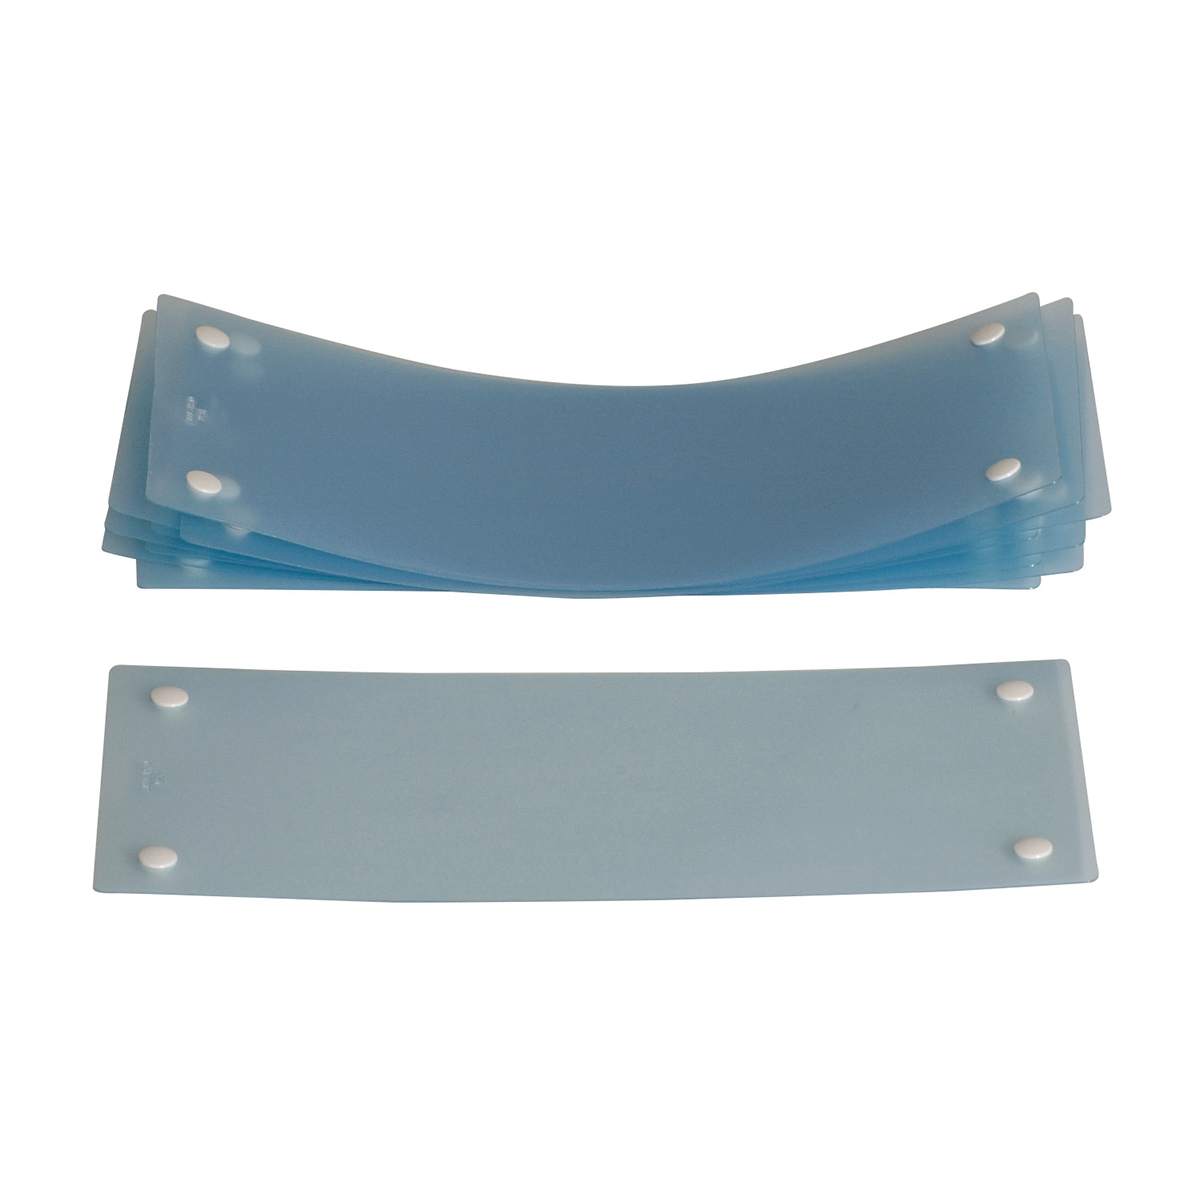 Bullard® PETG Replacement Outer Lens For GR50 (10 Per Pack) (Availability restrictions apply.)